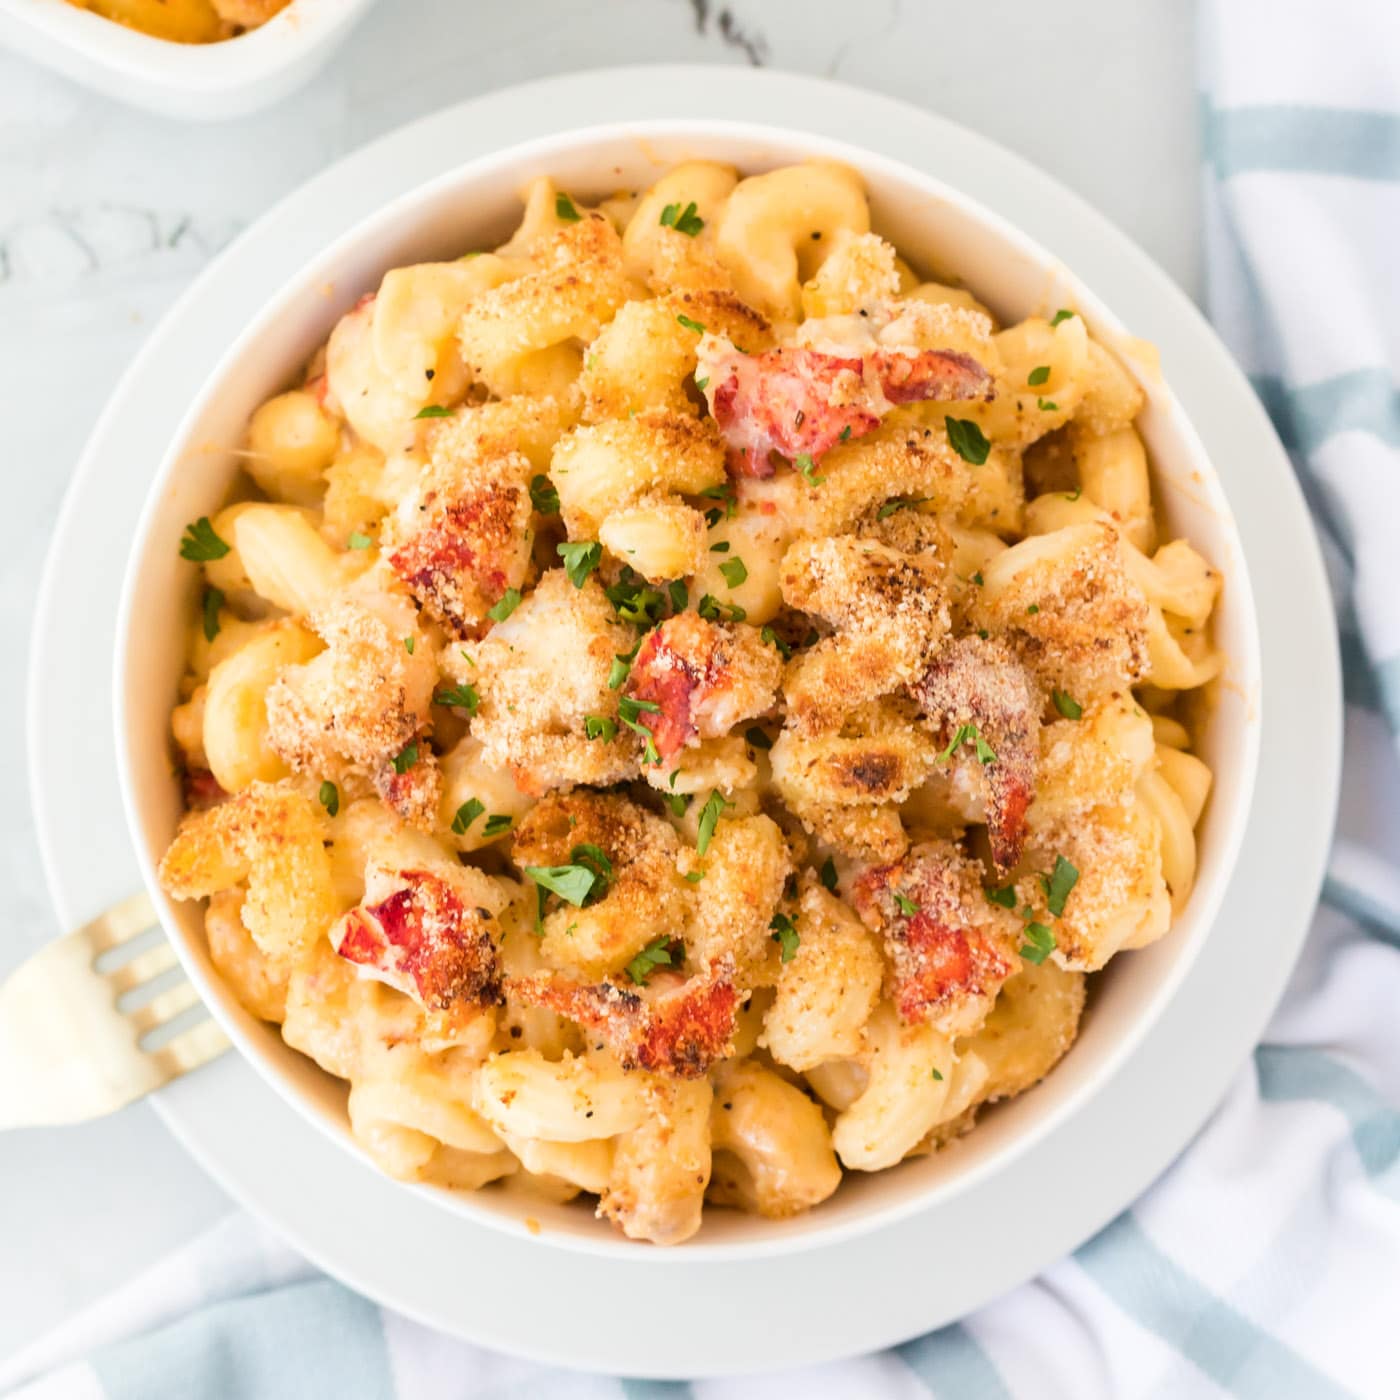 Crockpot Mac and Cheese - Cooking Classy